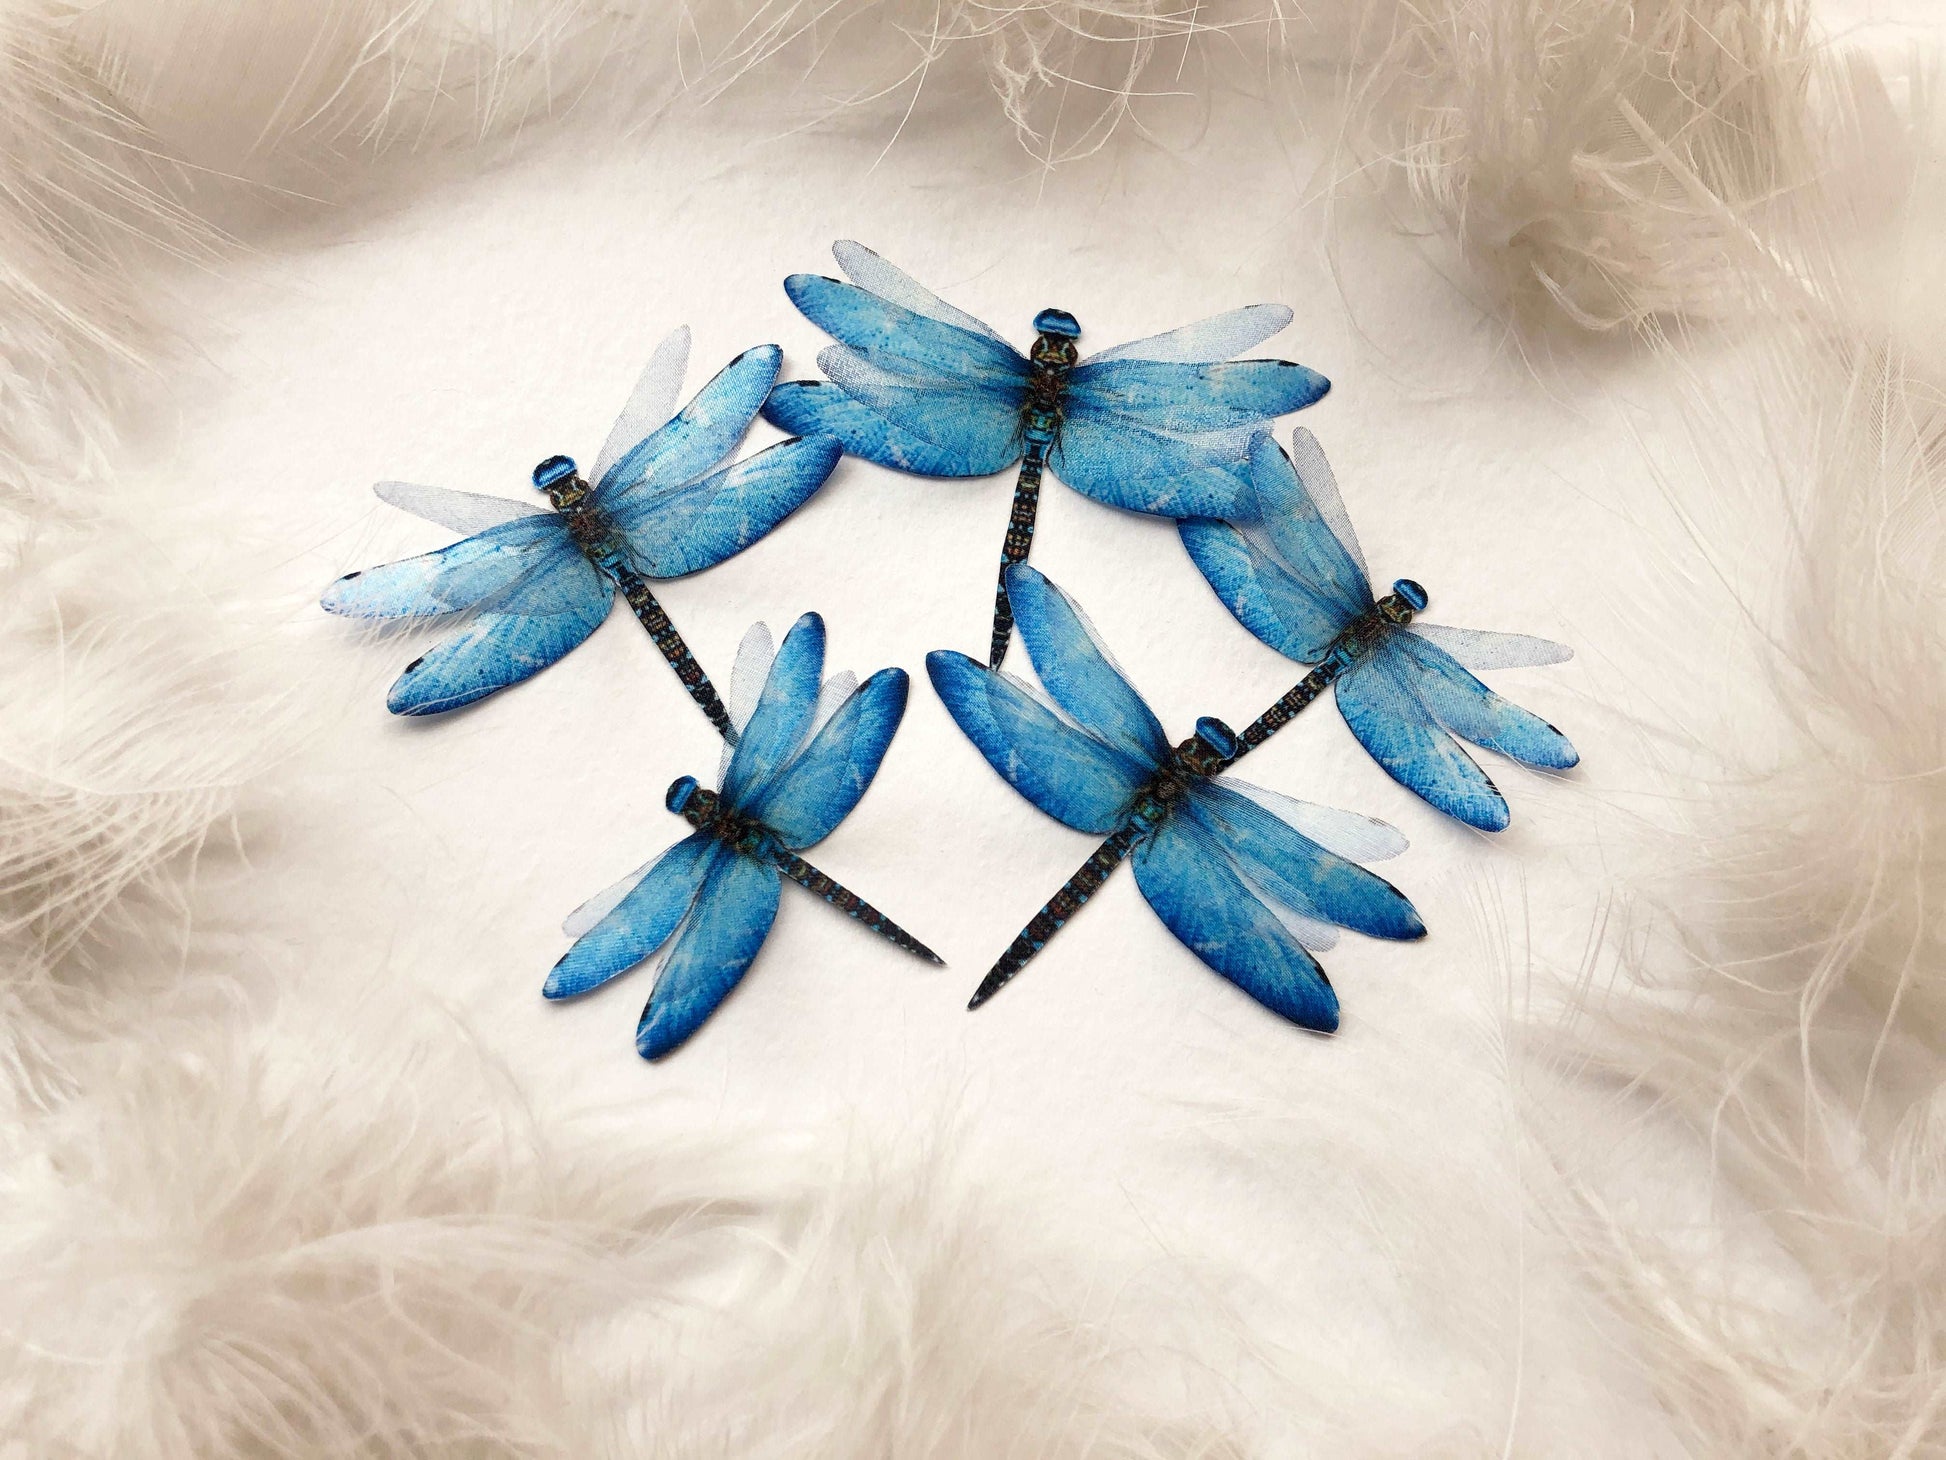 5 Faux Dragonflies in Blue Color on White Background with White Feathers